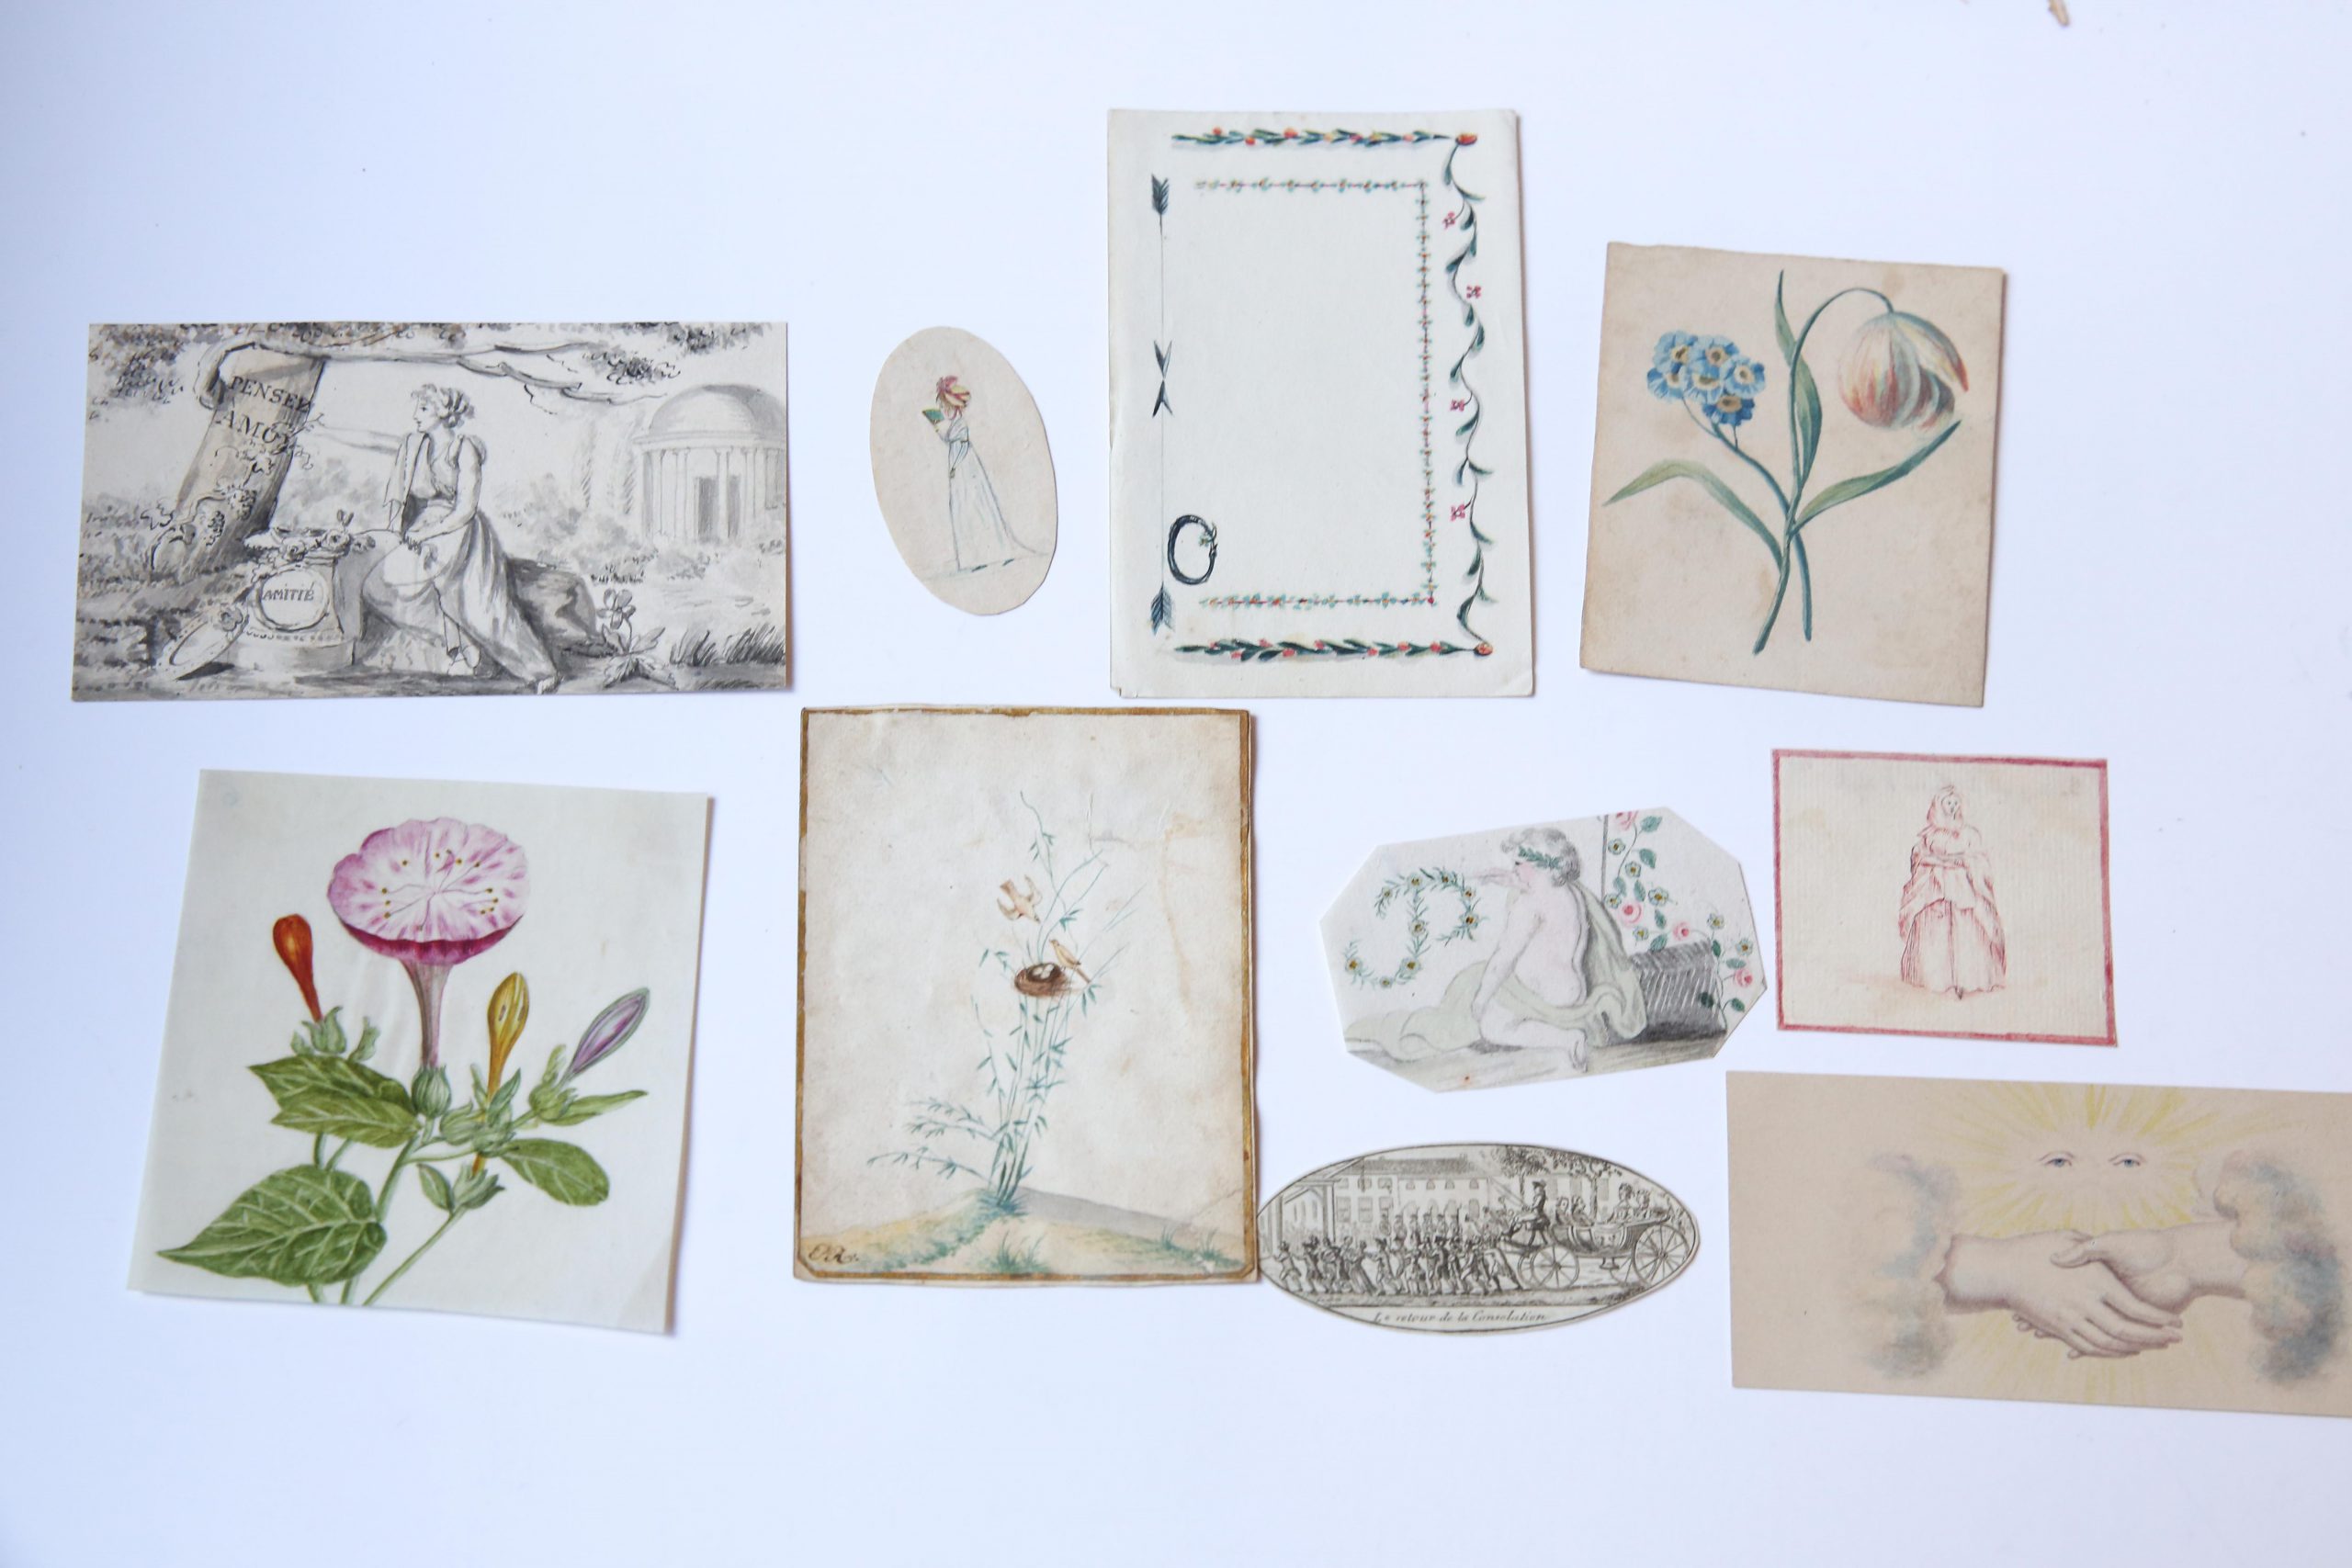 [Drawings and print on paper] Small drawings and a print, 1750-1800.